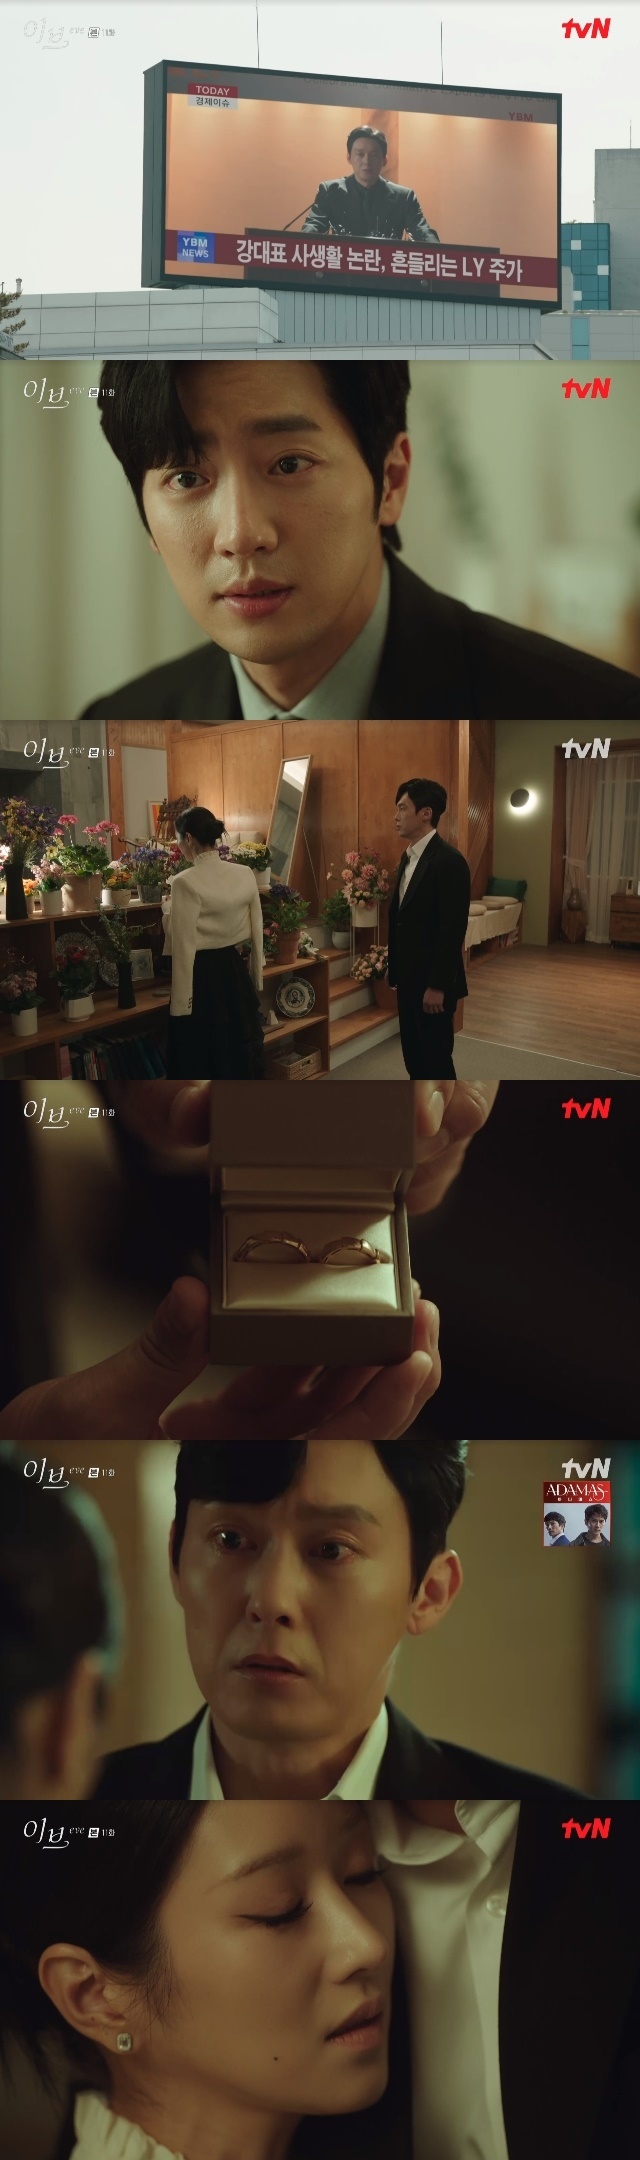 Seo Ye-ji, who came to love Byeong-eun Park, was in agony.In the 11th episode of the TVN drama Eve (playplayed by Yoon Young-mi and directed by Park Bong-seop), which was broadcast on July 6, Lee Gelael (Seo Ye-ji) spurred rEvege while feeling love for Kang Yoon-gyeom (Byeong-eun Park).Kang Yoon-kyum, who informed Han Sora (Yoo Seon-min) of the divorce on the day, packed his luggage and left the house. Han Sora grabbed Kang Yoon-kyum, but Kang Yoon-kyum responded firmly, Do not touch my body.Eventually, when Kang Yoon-kyum left the house, Han Sora urgently called his secretary and ordered him to hold him with a dabby pawn; wait for the kindergarten shop car.Jang Moon-hee (Lee Il-hwa) started the LY lawsuit for rEvege, but the brakes were put on when Lee Sean Gelael (Seo Ye-ji) reset the fingerprint security system in a secret place with all the evidence.When Jean Moon-hee called and asked about it, Lee said, Doctor broke the trust. If you admit the mistake, come to the rose house.In addition, Sean Gelael secured the identity of Kang Yoon-gyeom and Han Soras daughter Darby one step ahead of Han Sora.Lee Sean Gelael accused Han Sora of where is your wife? And said, I already have a change of owner, but I still do not feel it.When my husband loses all his money and his mind and body start to rot, I will tell him then. Then I made a meaningful statement to Han Sora, who warned me to kill him, So I am like those two women who changed the fate of Han Sora.Seo Eun-pyeong (Lee Sang-yeop) threatened Kim Jong-chul (Jung Hae-gyun) to defend Lee.Without knowing the brink (the national exchange), Kim Jong-chul shows the details of the Swiss nickname account that was made by taking money out of almost all the projects, saying, Kim Sun Bin (Sean Gelael) is the daughter of a benefactor who took care of me.My family. Seo Eun-pyeong then handed over a draft lawsuit under Jang Moon-hee to Lee Sean Gelael.In this process, Seo Eun-pyeong came to the house of Sean Gelael and faced Kang Yoon-gum who was staying together.Seo Eun-pyeong was worried that Sean Gelael did not really love Kang Yoon-kyum because he did not inform himself of his cohabitation, and said, If you really like Kang, you will suffer.I hope you dont, he warned.Sean Gelael felt love and pain for Kang, who Eve tried to endure her love for Kang.The next day, Sean Gelael stopped by Boram and Kindergarten to deliberately reveal his presence to Lisa (Lee Ji-ha) in the kindergarten directors car.Lisa saw Han Sora about Sean Gelael straight away, and Han Sora followed him.Han Sora also informed the brink and Kim Jong-chul, and the rose house where the two stayed was attacked.However, due to this incident, Kang Yoon-gum and Sean Gelael started to turn into securities company Jirashi.In the end, Kang Yoon-gyeom was surrounded by a massive privacy controversy and Han Soras position became unstable.In a series of Evets, Jang decided to cooperate with Lee.Jang Moon-hee said, I will protect Sean Gelael as much as possible without going to the press. I have two weeks to earn.In two weeks, Lee decided to finish his rEvege, and then he called Kang Yun-gyeom and pretended to be known to the world as his wife and to be distressed.The court executor visited Han Soras house because Kang Yoon-kyum had filed for divorce, while LY shares fell 20 percent in just a few days.In this situation, the bout called Seo Eun-pyeong and asked about this Sean Gelael. Nevertheless, Seo Eun-pyeong said, Its like a family.I can not tolerate Kim Sun Bin going through hard work. He shouted to Han Sora to divorce him, saying that he could not do anything.You can take everything away and make a beggar and drive it away, Han Pan-ro said.Meanwhile, Han Sora gave separate instructions to Moon Do-wan (Cha Ji-hyuk), saying, I never get divorced; Father and I have no choice but to go the other way.Han Sora ordered that Father or he secretly catch the X by conciliating him to the operating expenses of his mother, saying, I know that he is desperate for your mothers surgery.Lee Sean Gelael used the lawsuit to try to reveal the Jeddix case to the world.Seo Eun-pyeong said, I will continue to help Lee Sean Gelael. It is right that Kang Yoon-gum is taken away and falls into hell.The expression of this Sean Gelael was not bright. She tried to catch her mind, saying, I should be happy. Who are you sympathizing with?However, waiting for this Sean Gelael who returned home is a flower Evet prepared by Kang Yoon-gum.Kang Yoon-gyeom said, Cosmos: A Spacetime Odyssey somehow reminds me of you when Lee Sean Gelael was surprised to see Cosmos: A Spacetime Odyssey.This Sean Gelael likewise recalled his father, who likened himself to Cosmos: A Spacetime Odyssey, who said, I know you have a wound.You follow your mind - before the season comes, Ill come to Cosmos: A Spacetime Odyssey.Then someday you will bloom. Kang Yoon-gums Evet was not the end here; Kang Yoon-gum, who took Sean Gelael to one Catchedral, handed the ring and said, I met you like a fate.I fell madly into you who resembled me and I could show you who knew me. I can not live without you now. I love you. I swear to live for you only for the rest of your life.I am not afraid to lose my life if there is a lie. I asked Kim Sun Bin, can you answer God that the man in front of you is a loved one?The hesitant Sean Gelael recalled his fathers advice to follow the true heart and once again replied Yes to Kang Yoon-gum, who asked Do you love me?